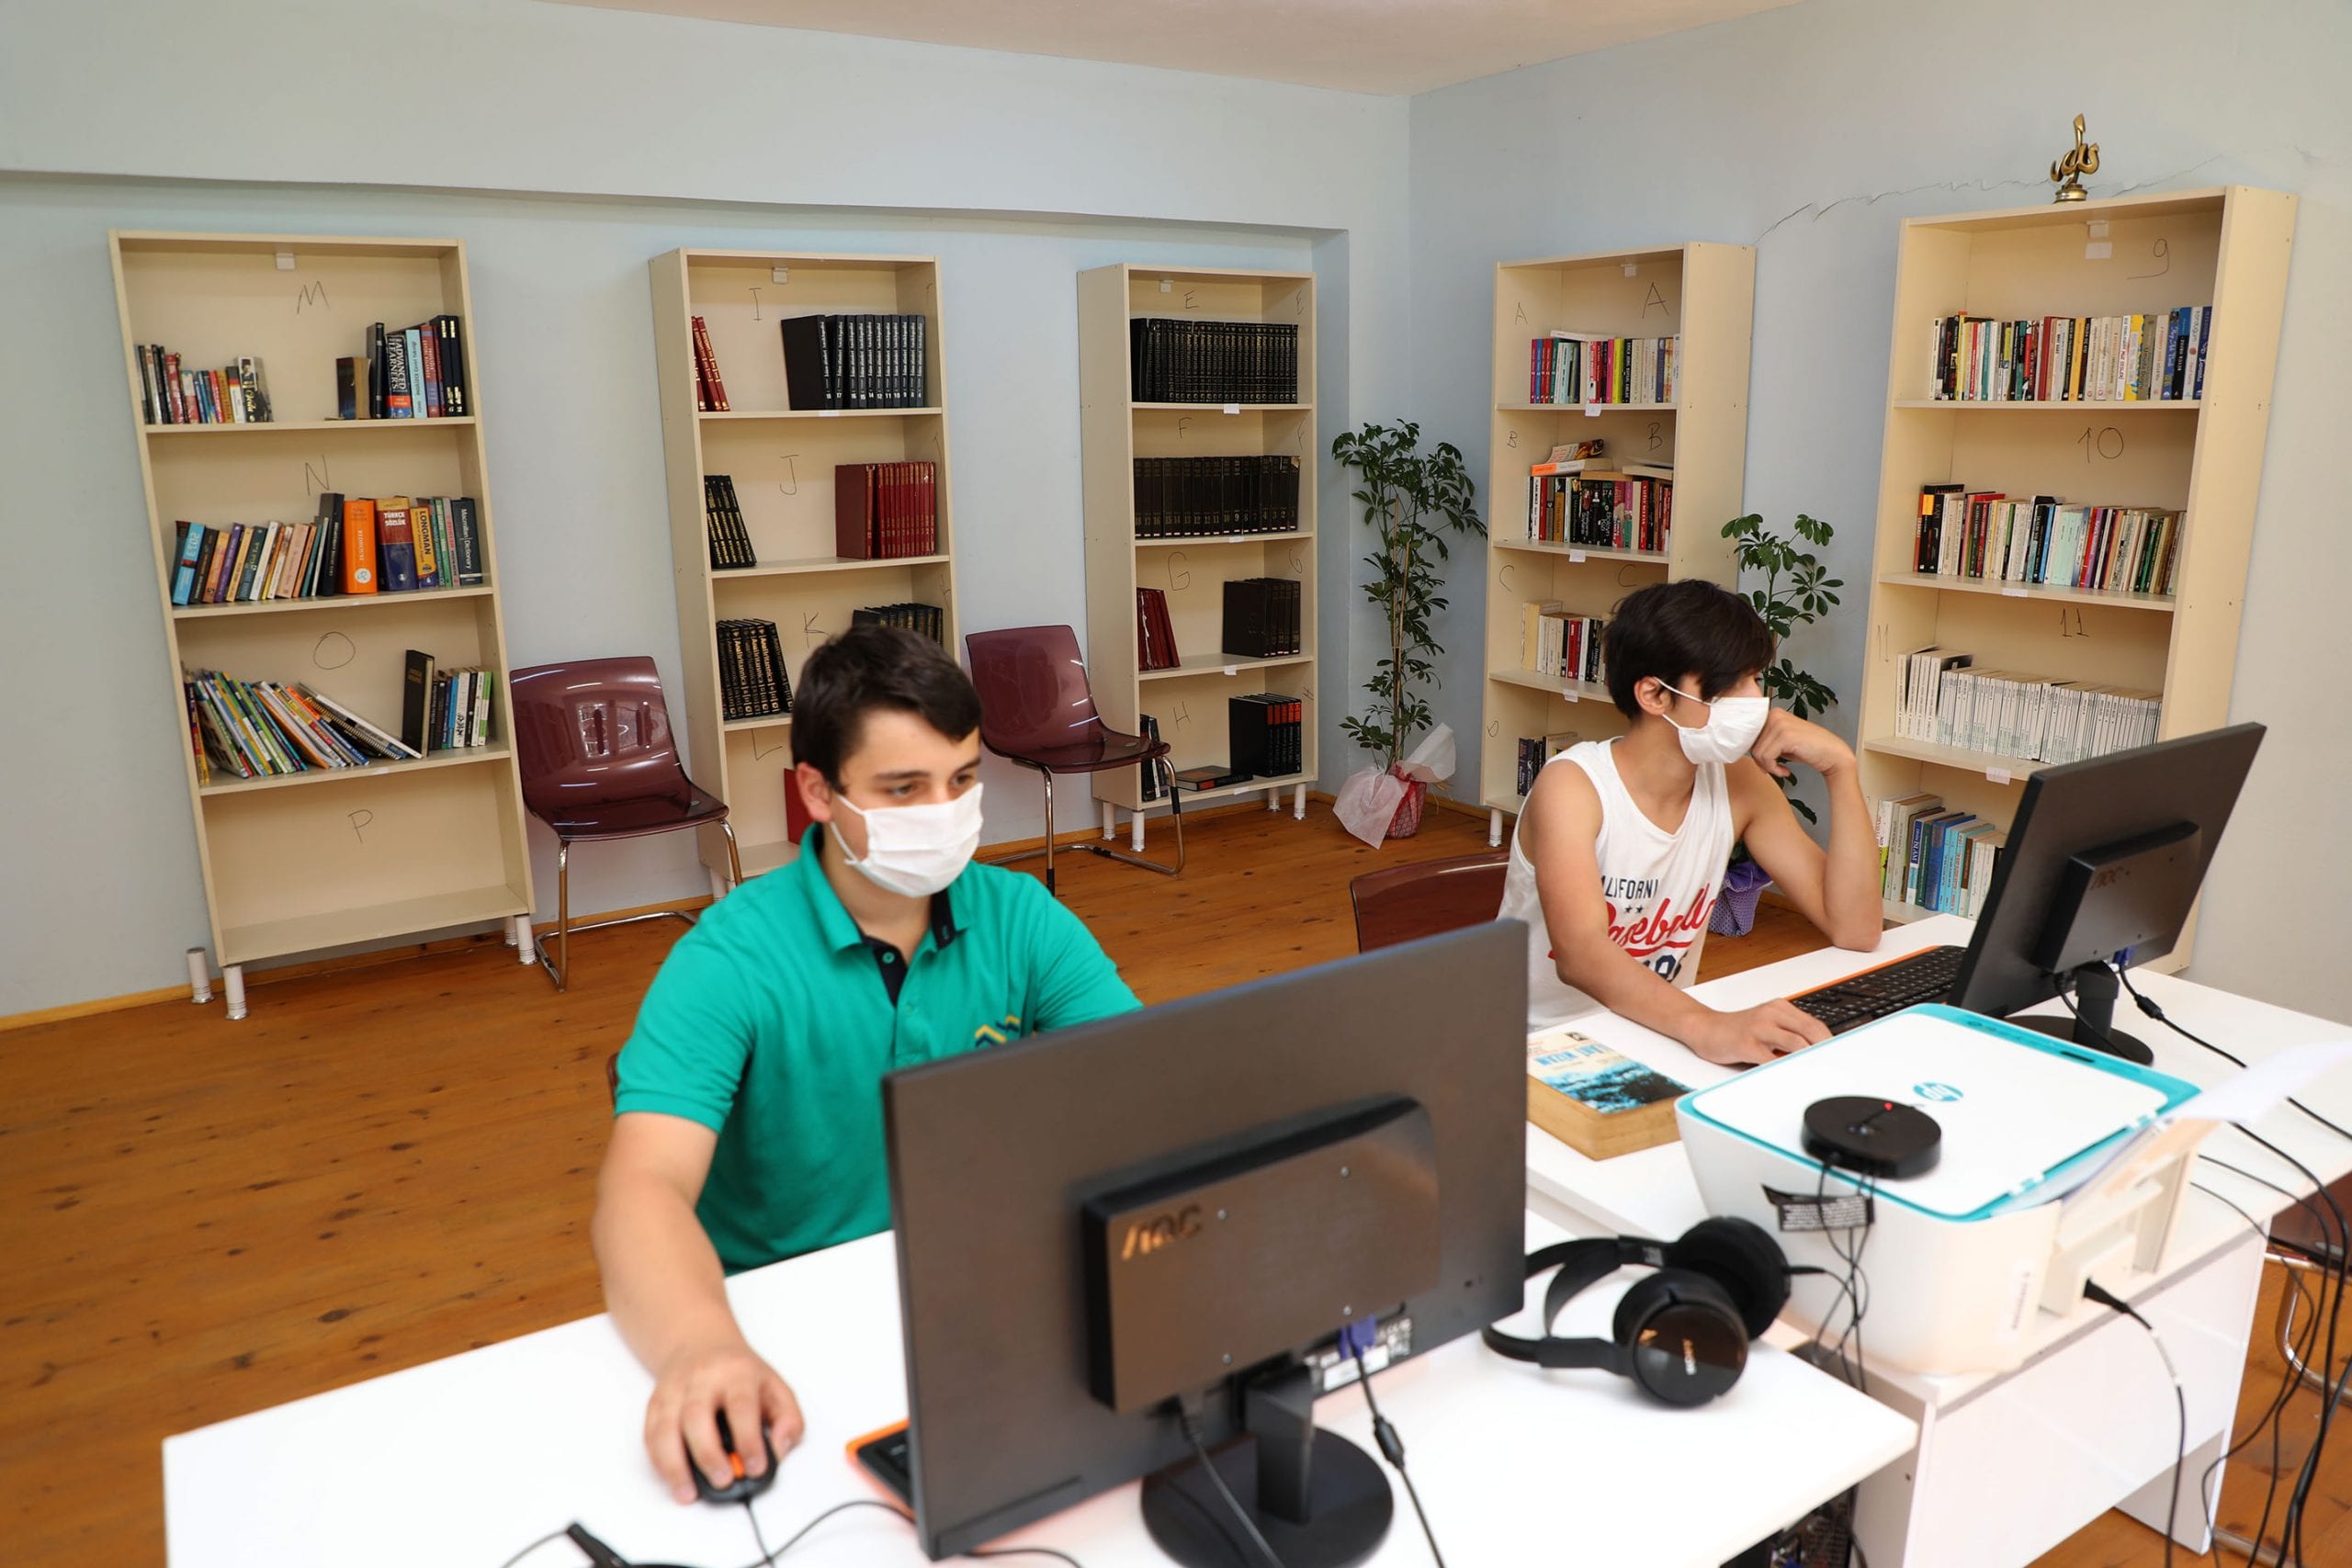 New school year starts in Turkey with distance education